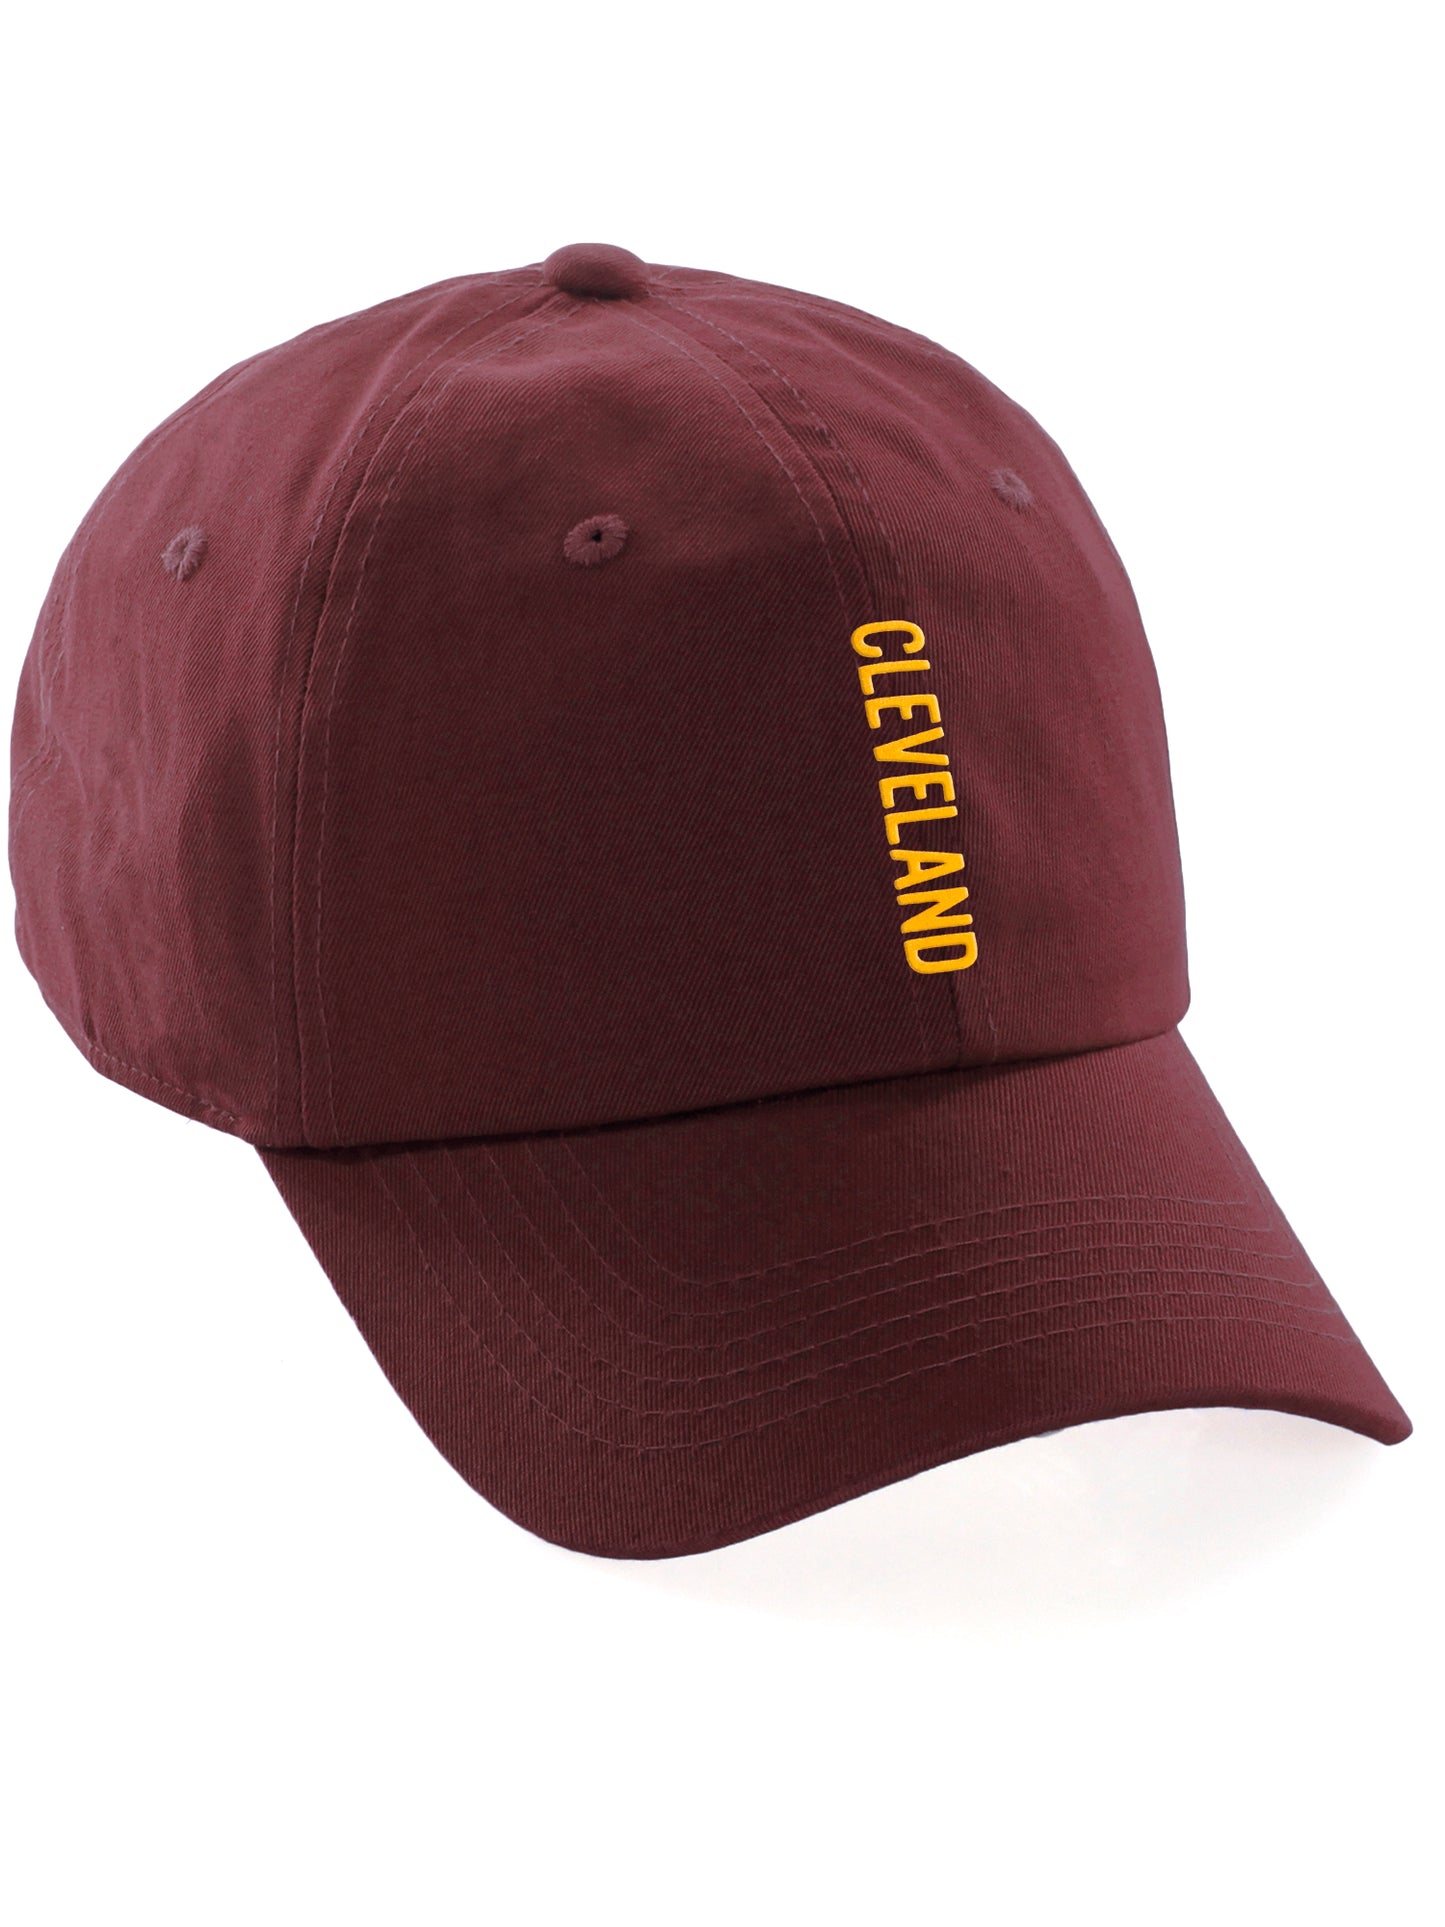 Daxton Vertical USA Cities Baseball Dad Hat Unstructure Low Profile Strapback